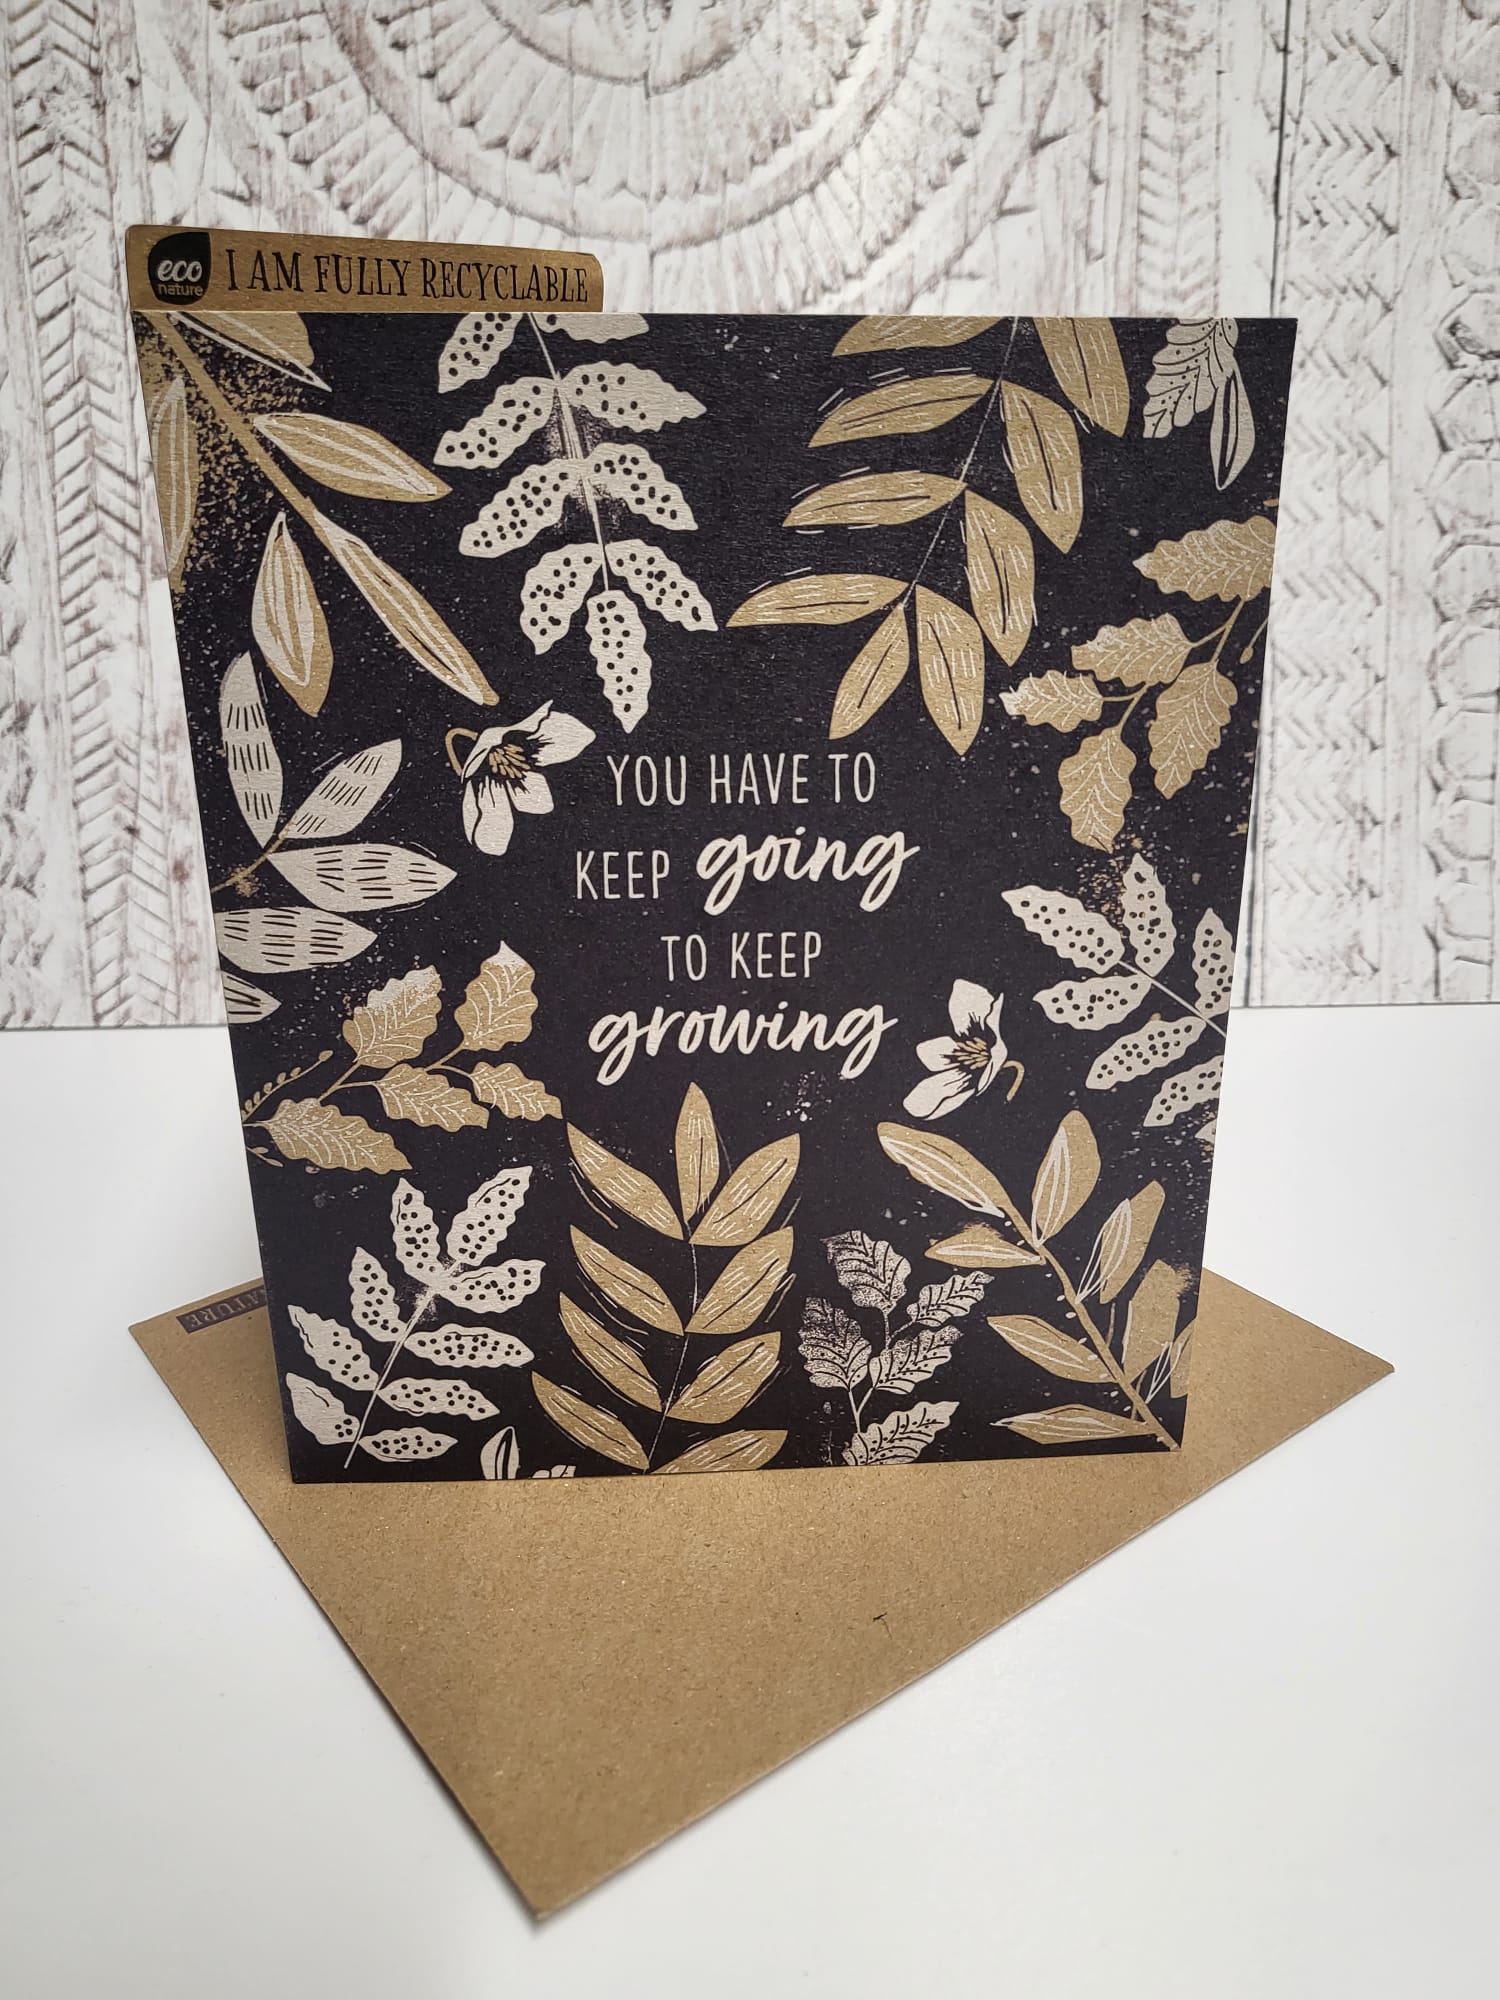 'You Have To Keep Going To Keep Growing' Fully Recyclable Greeting Card